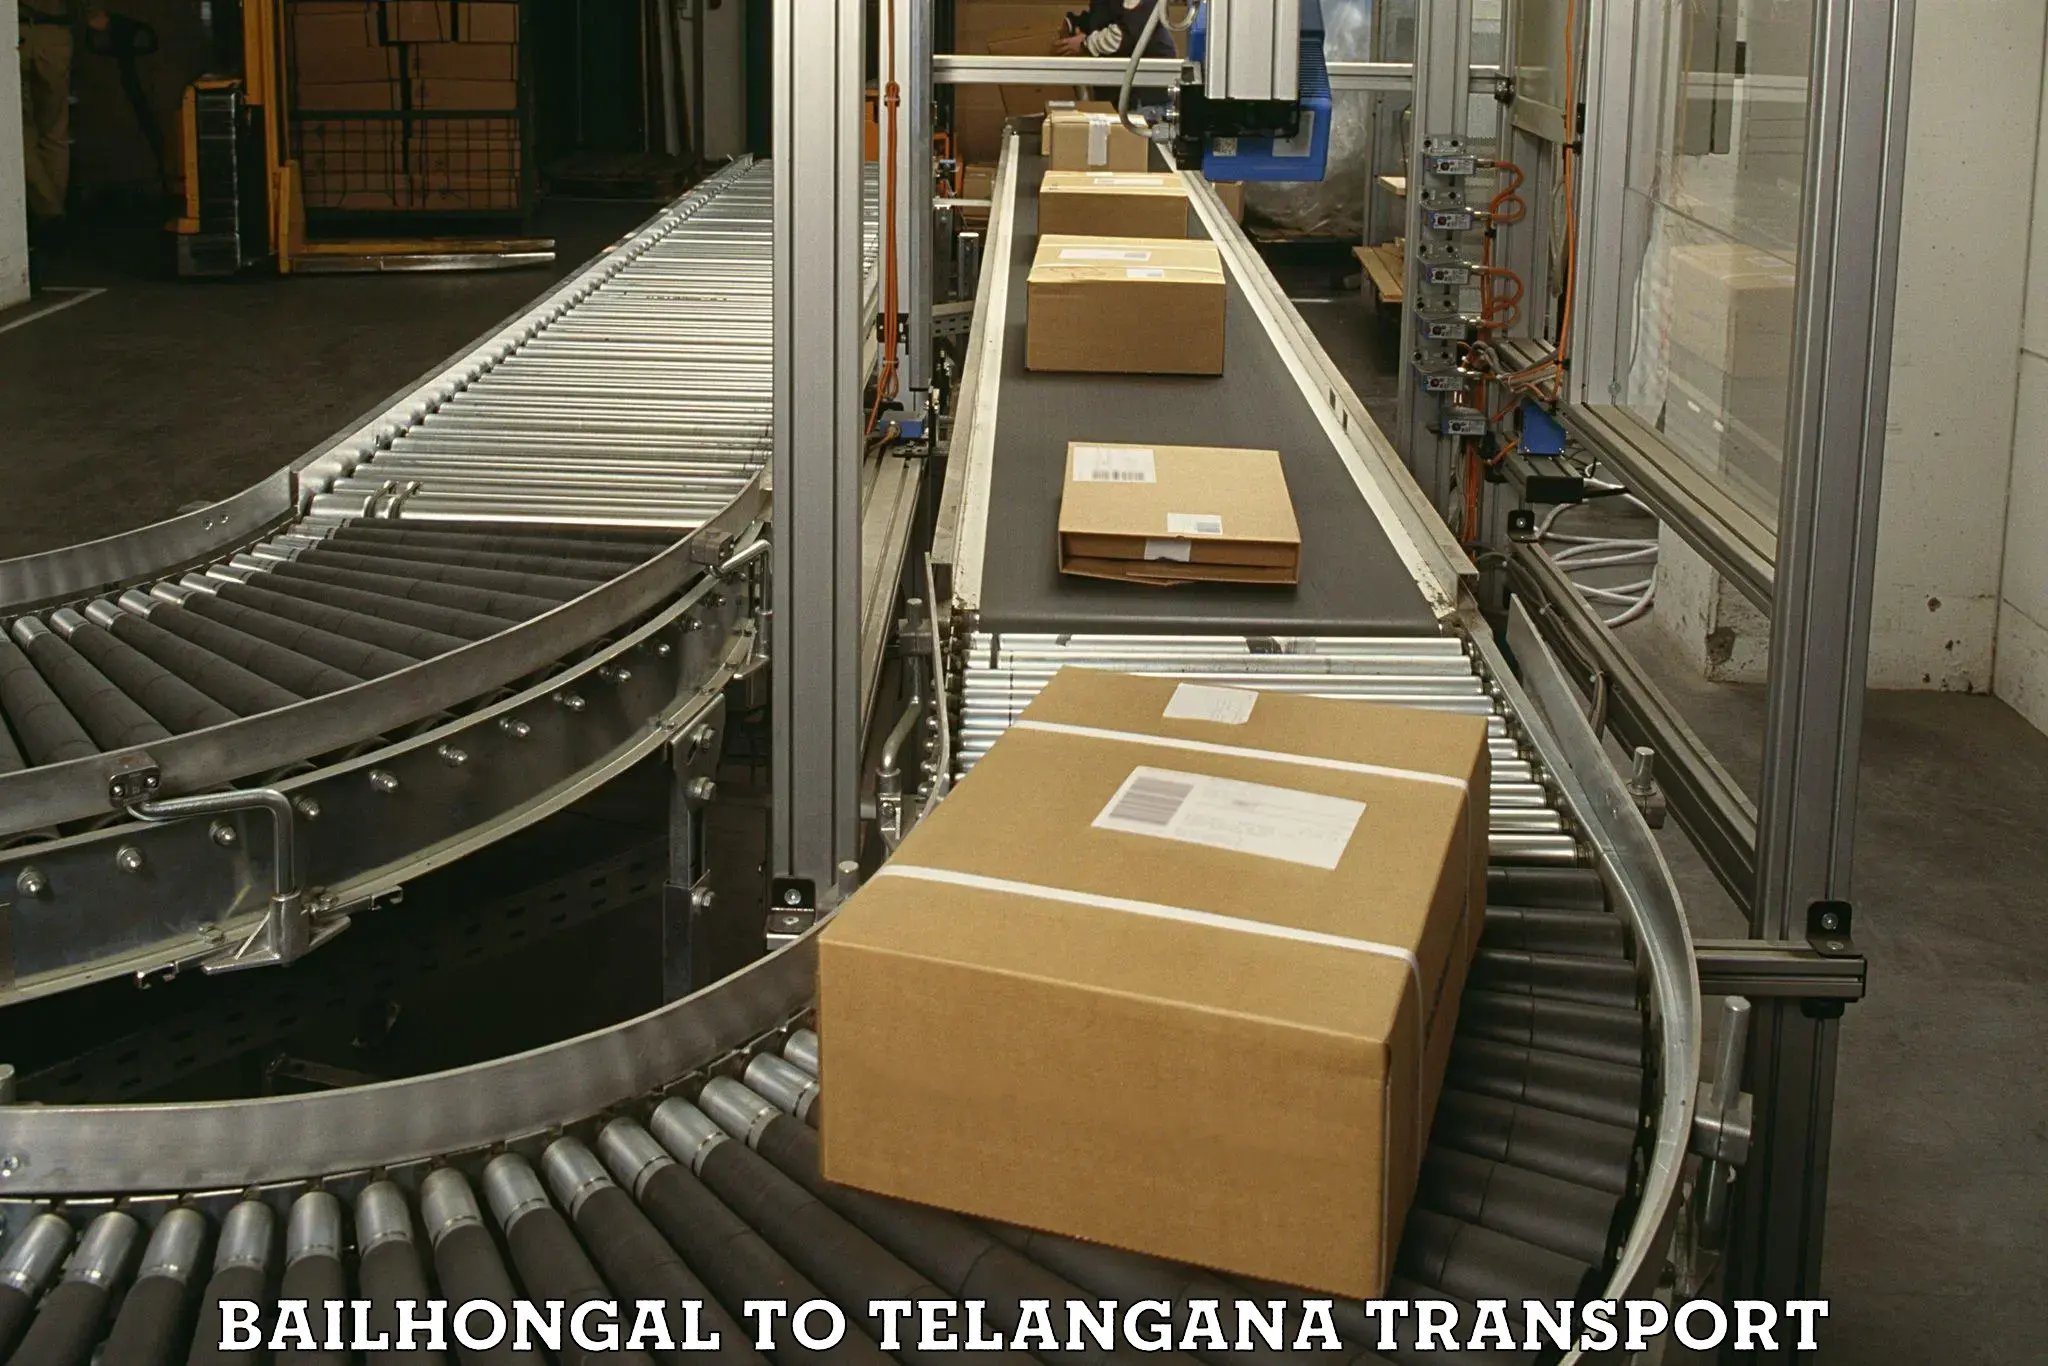 Domestic transport services Bailhongal to Mogulla Pally